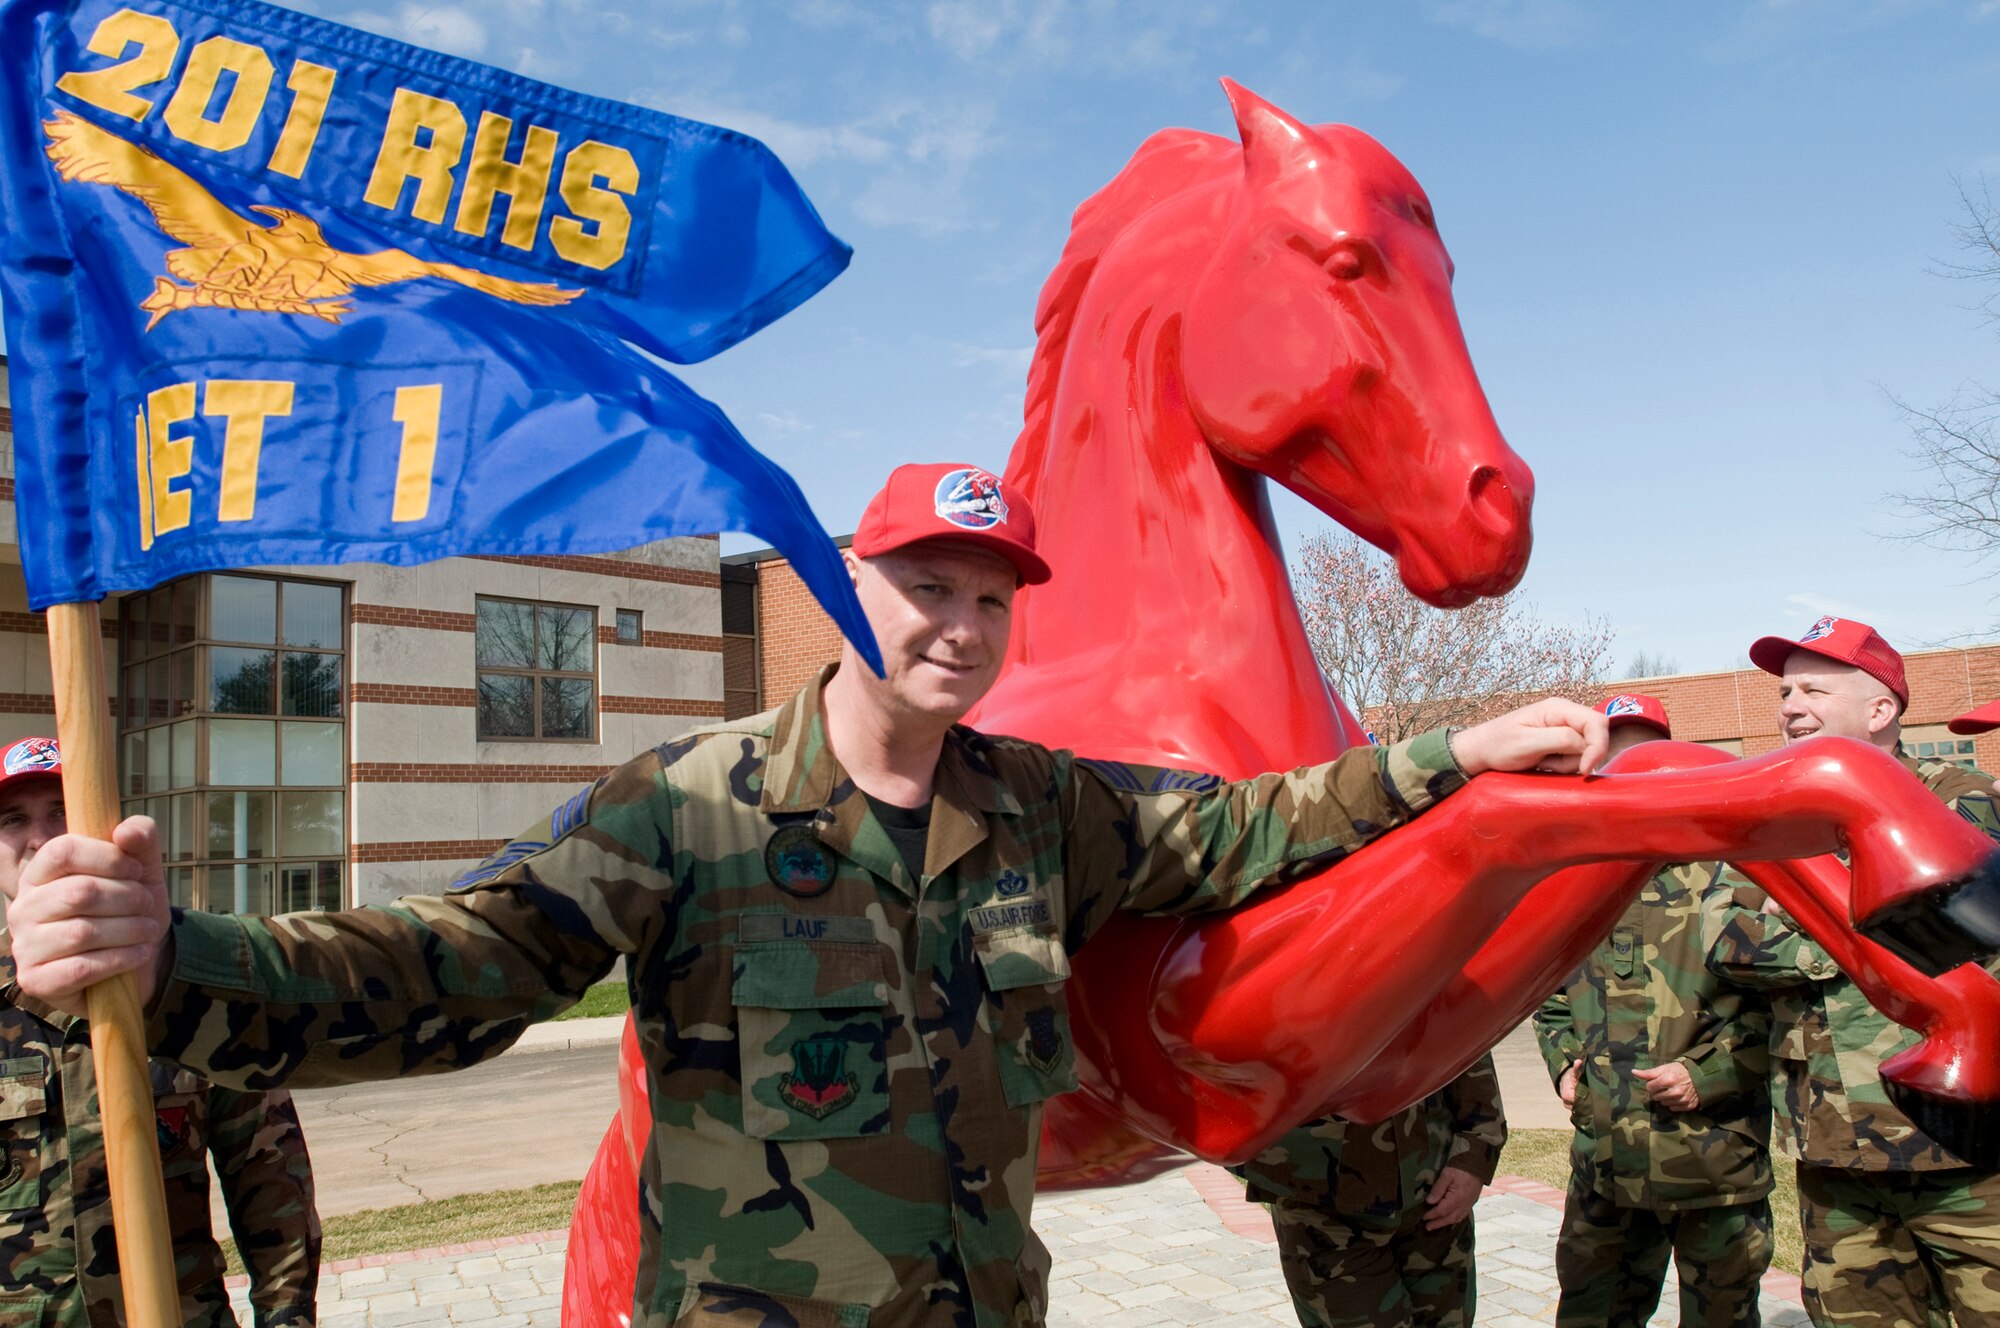 On April 5, more than 100 guardsmen sported the red caps for the first time and cheerfully yelled “to the HORSE” during the 201st RED HORSE Squadron, Det. 1 activation ceremony at Willow Grove Air Reserve Station, Pa. RED HORSE stands for Rapid Engineer Deployable Heavy Operational Repair Squadron Engineer. These units are self sufficient, 404-person mobile squadrons that provide major force bed-down, heavy damage repair, and heavy engineering operations in remote, high-threat environments worldwide. 